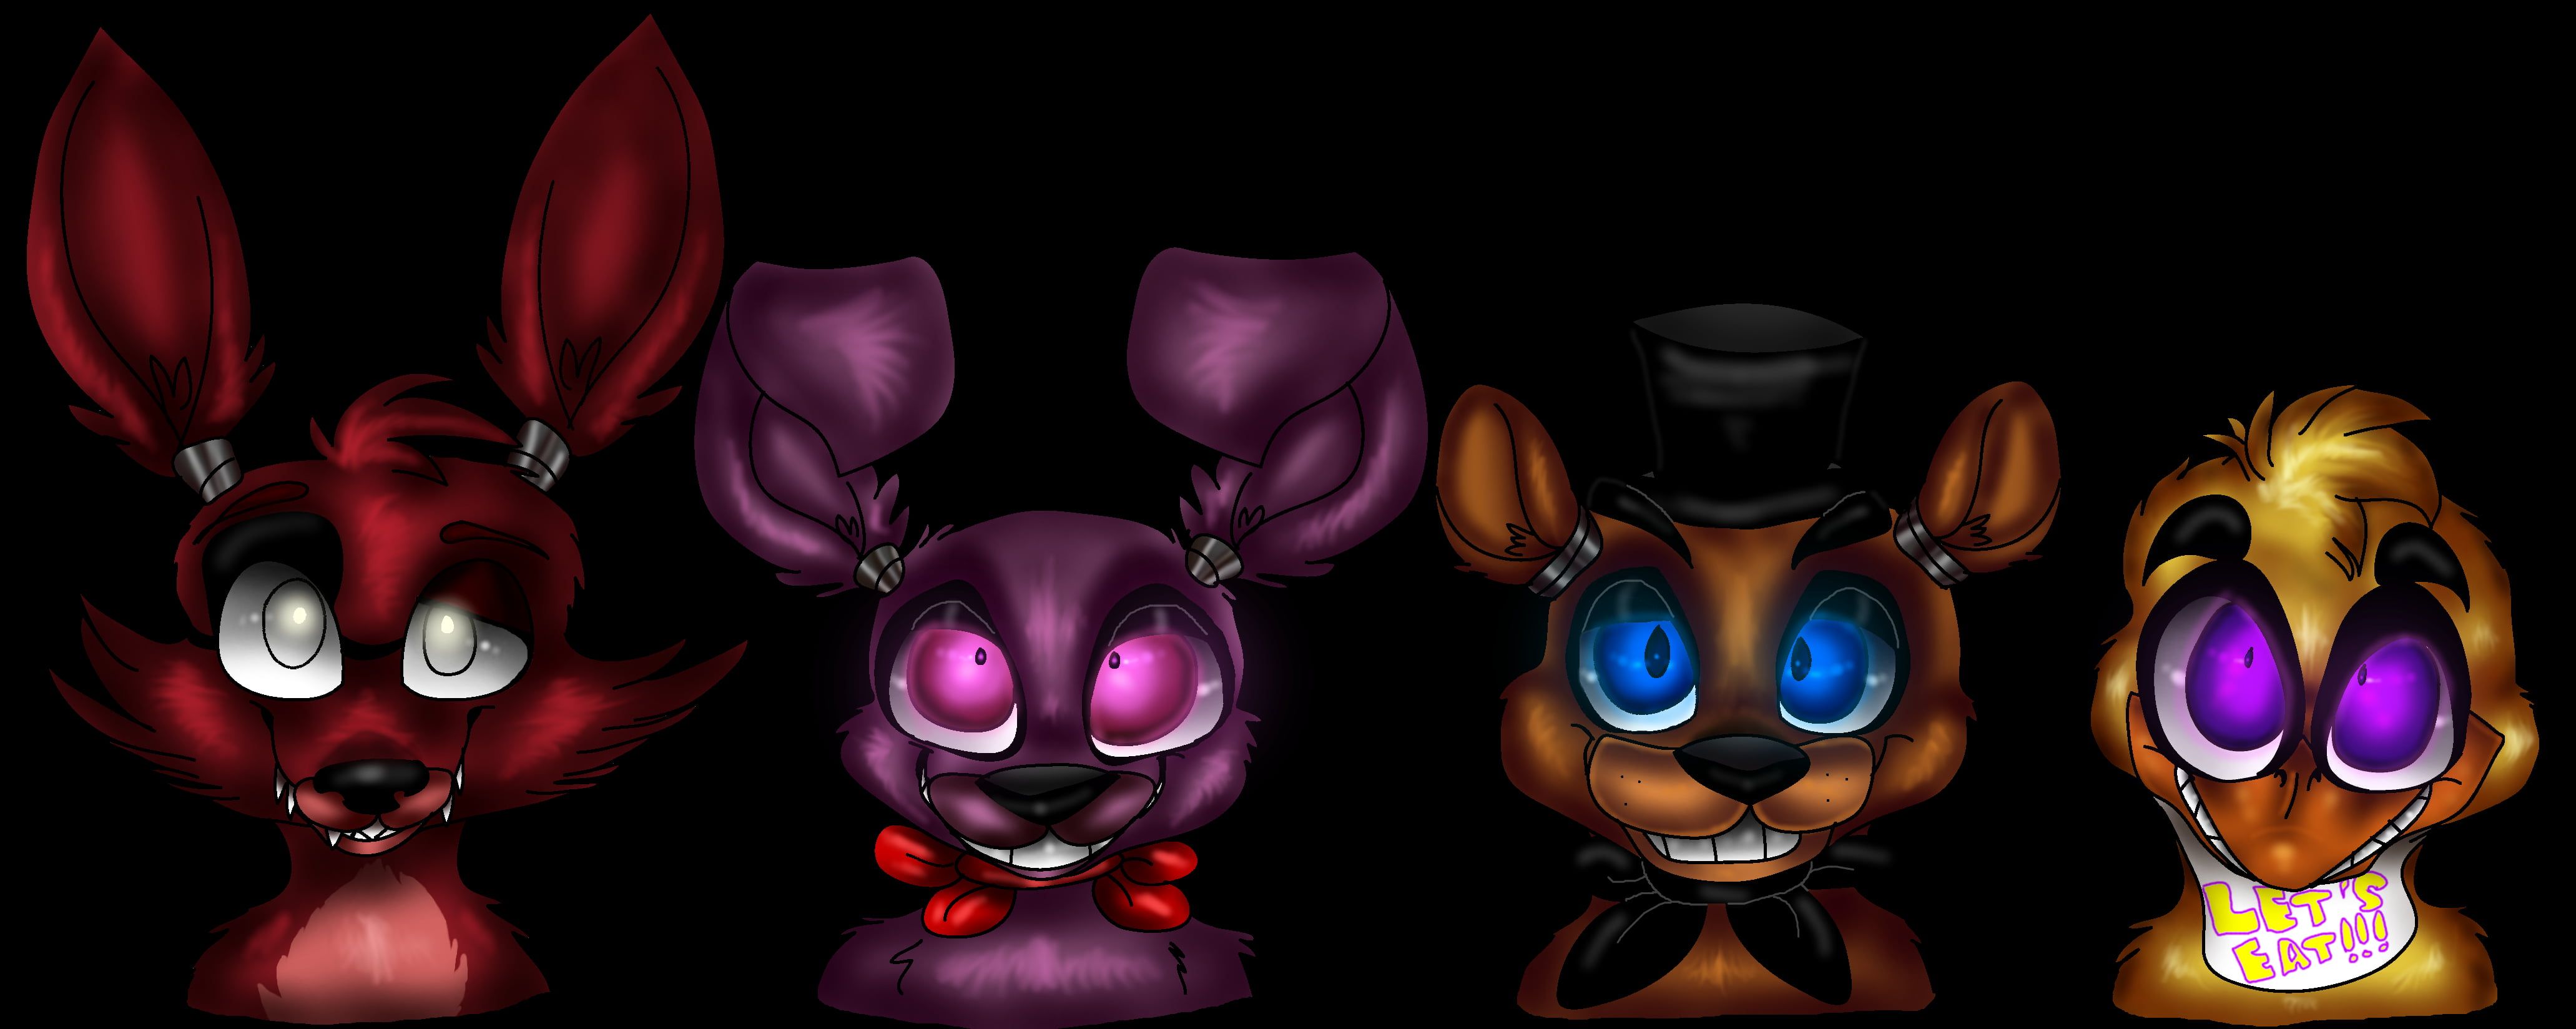 Five Night at Freddy's game, Five Nights at Freddy's, video games